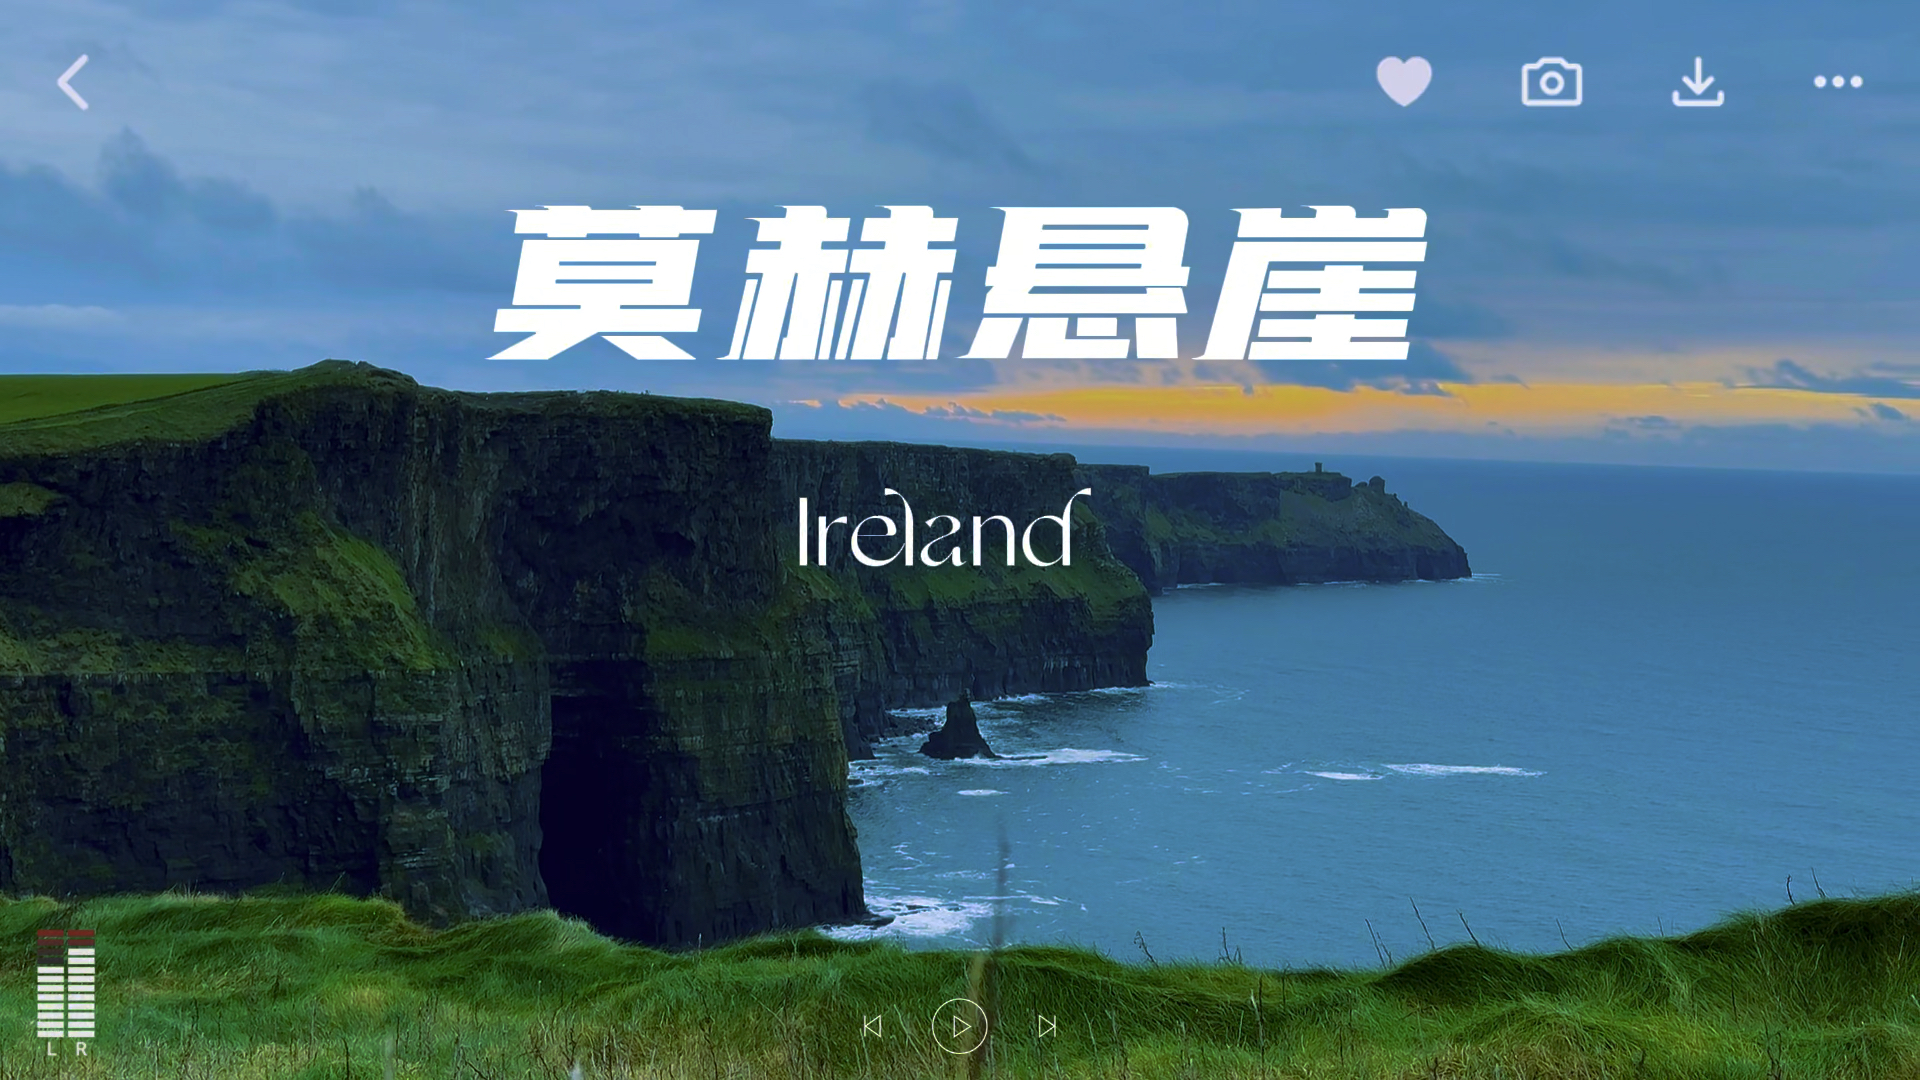 Cliff of Moher 莫赫悬崖⛰️⛰️⛰️